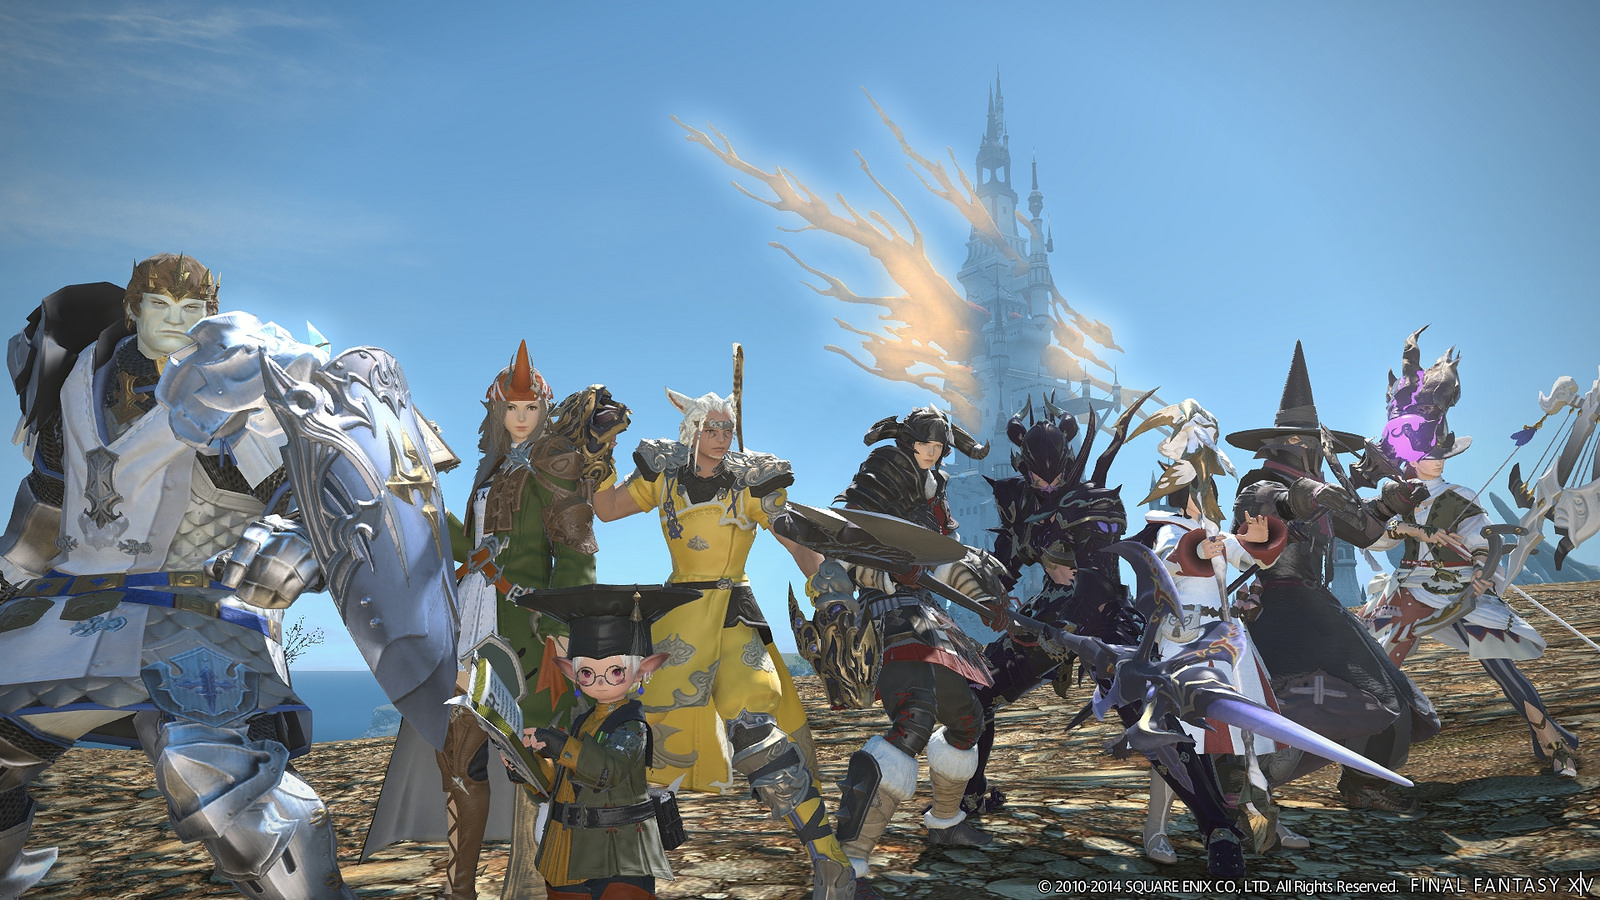 Final Fantasy XIV PS4 Beta Begins February 22. See How Pretty It Is.